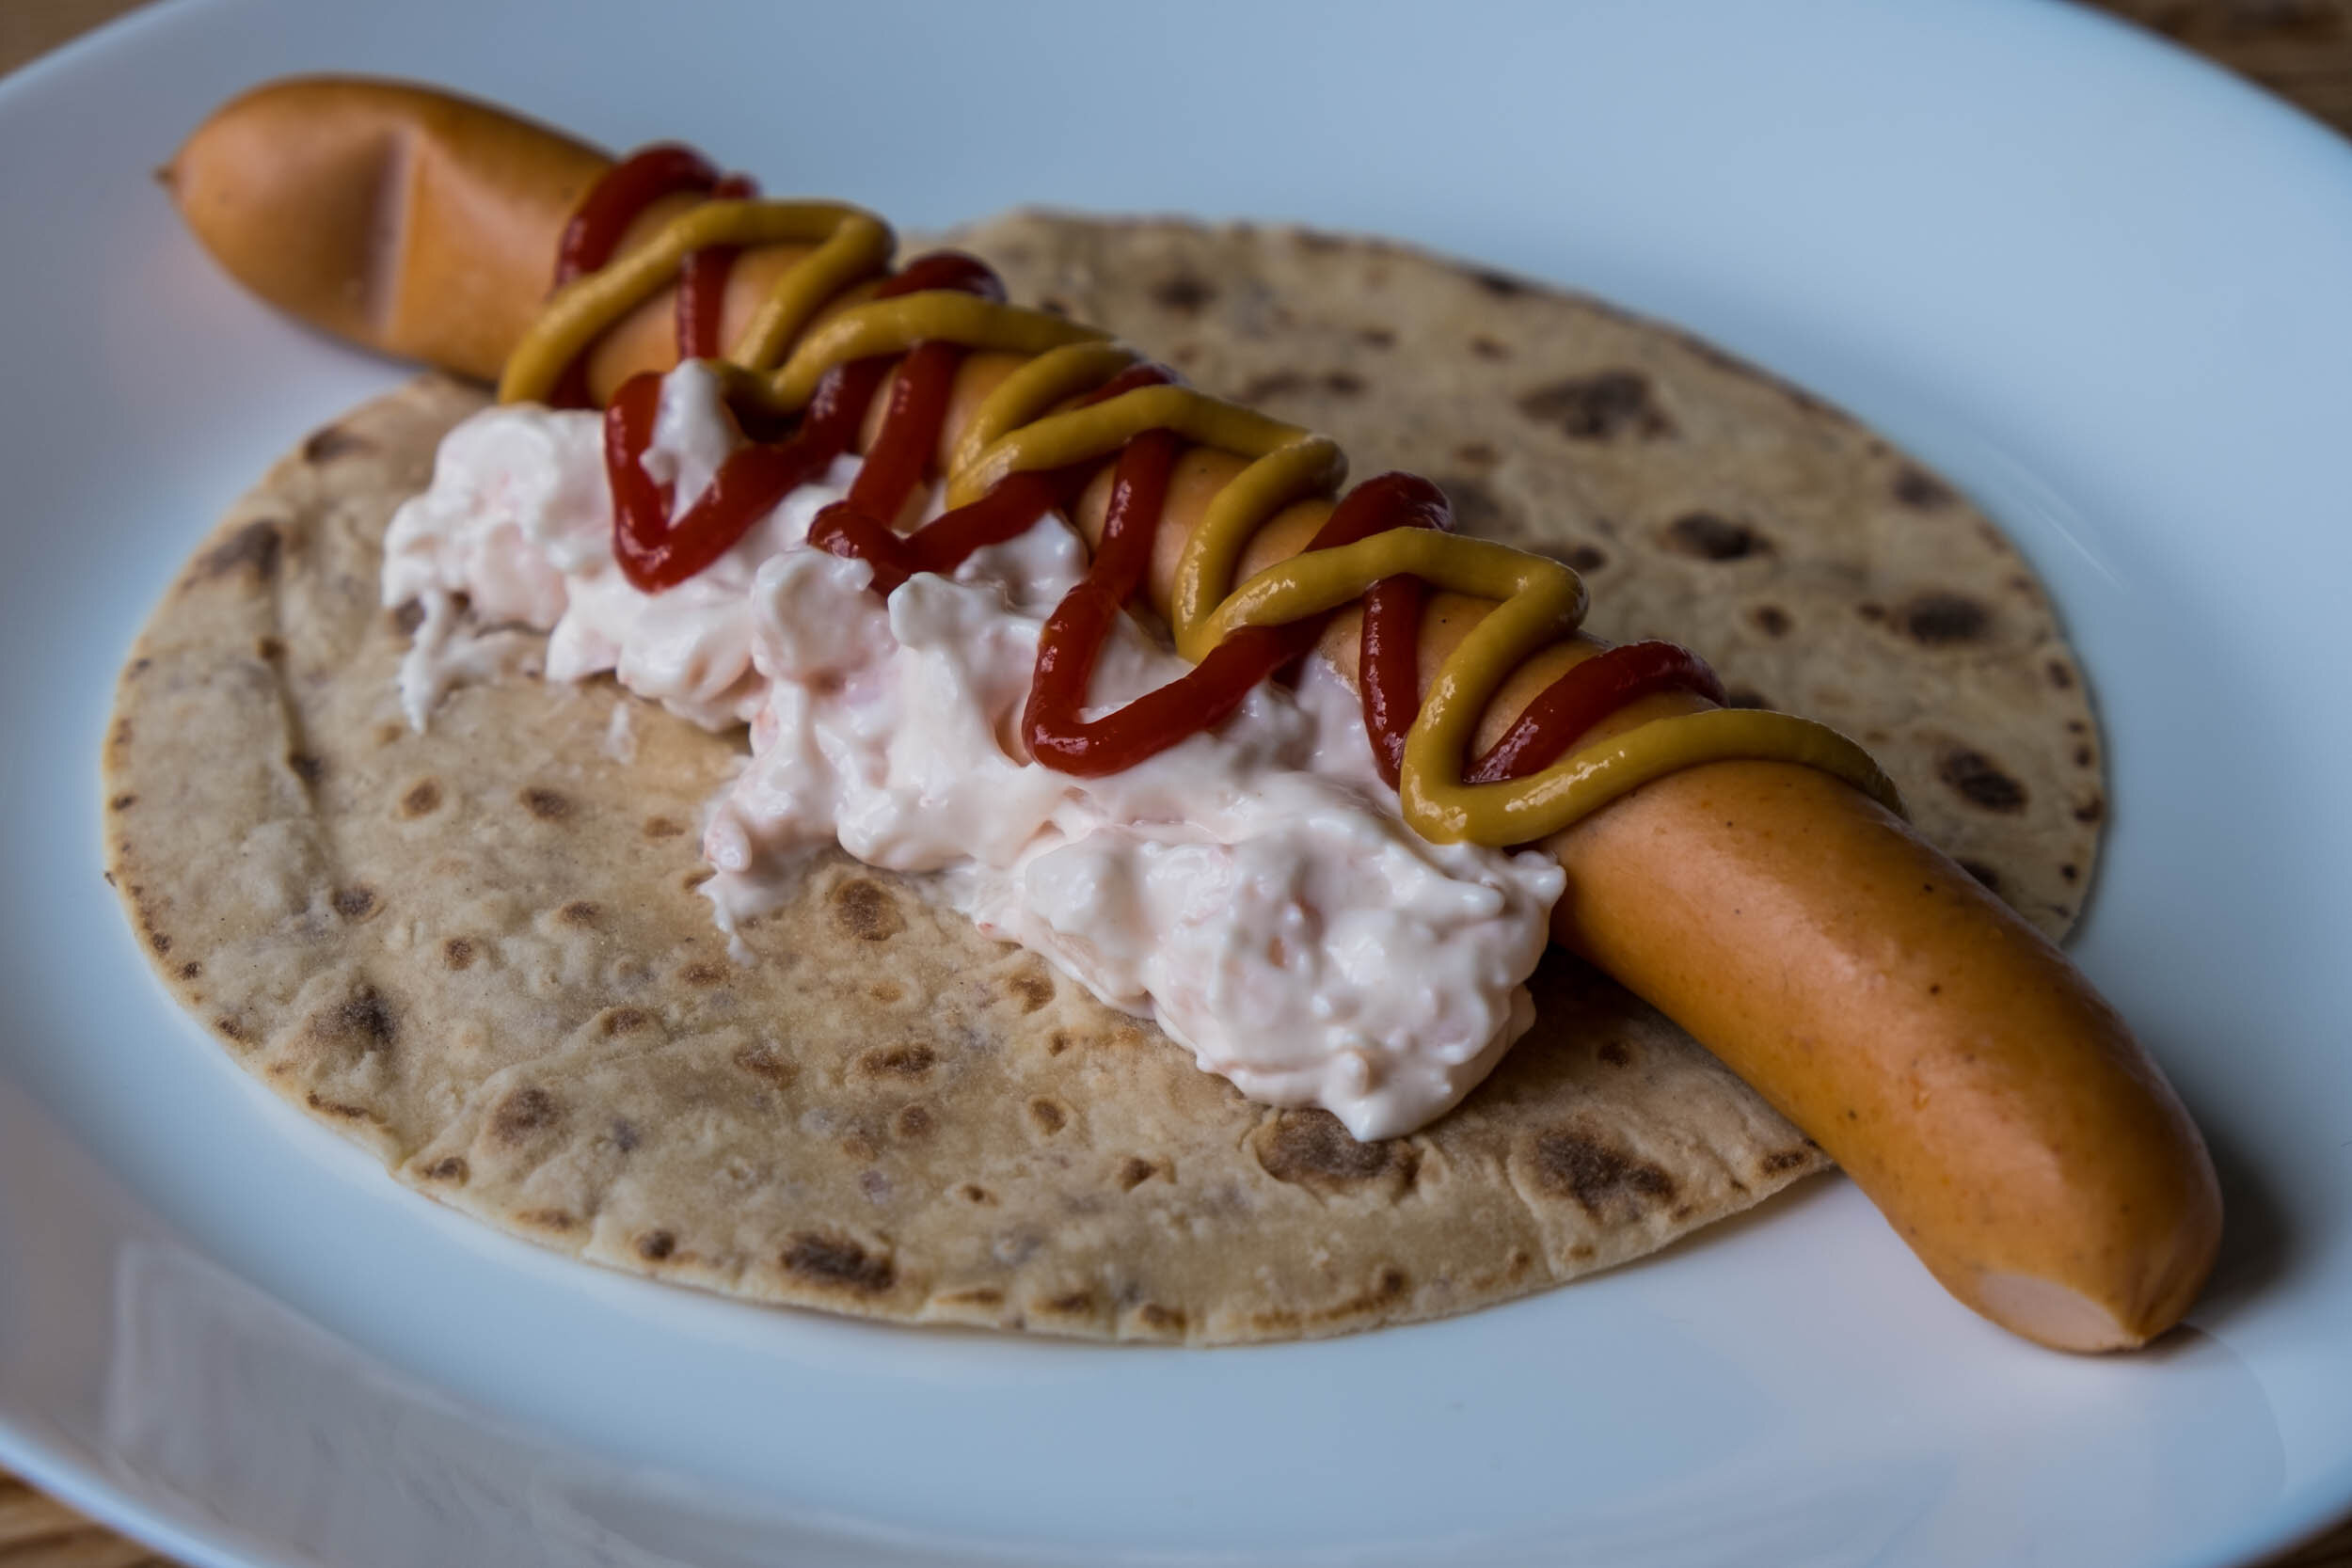 Hot dog with shrimp salad - a Norwegian speciality